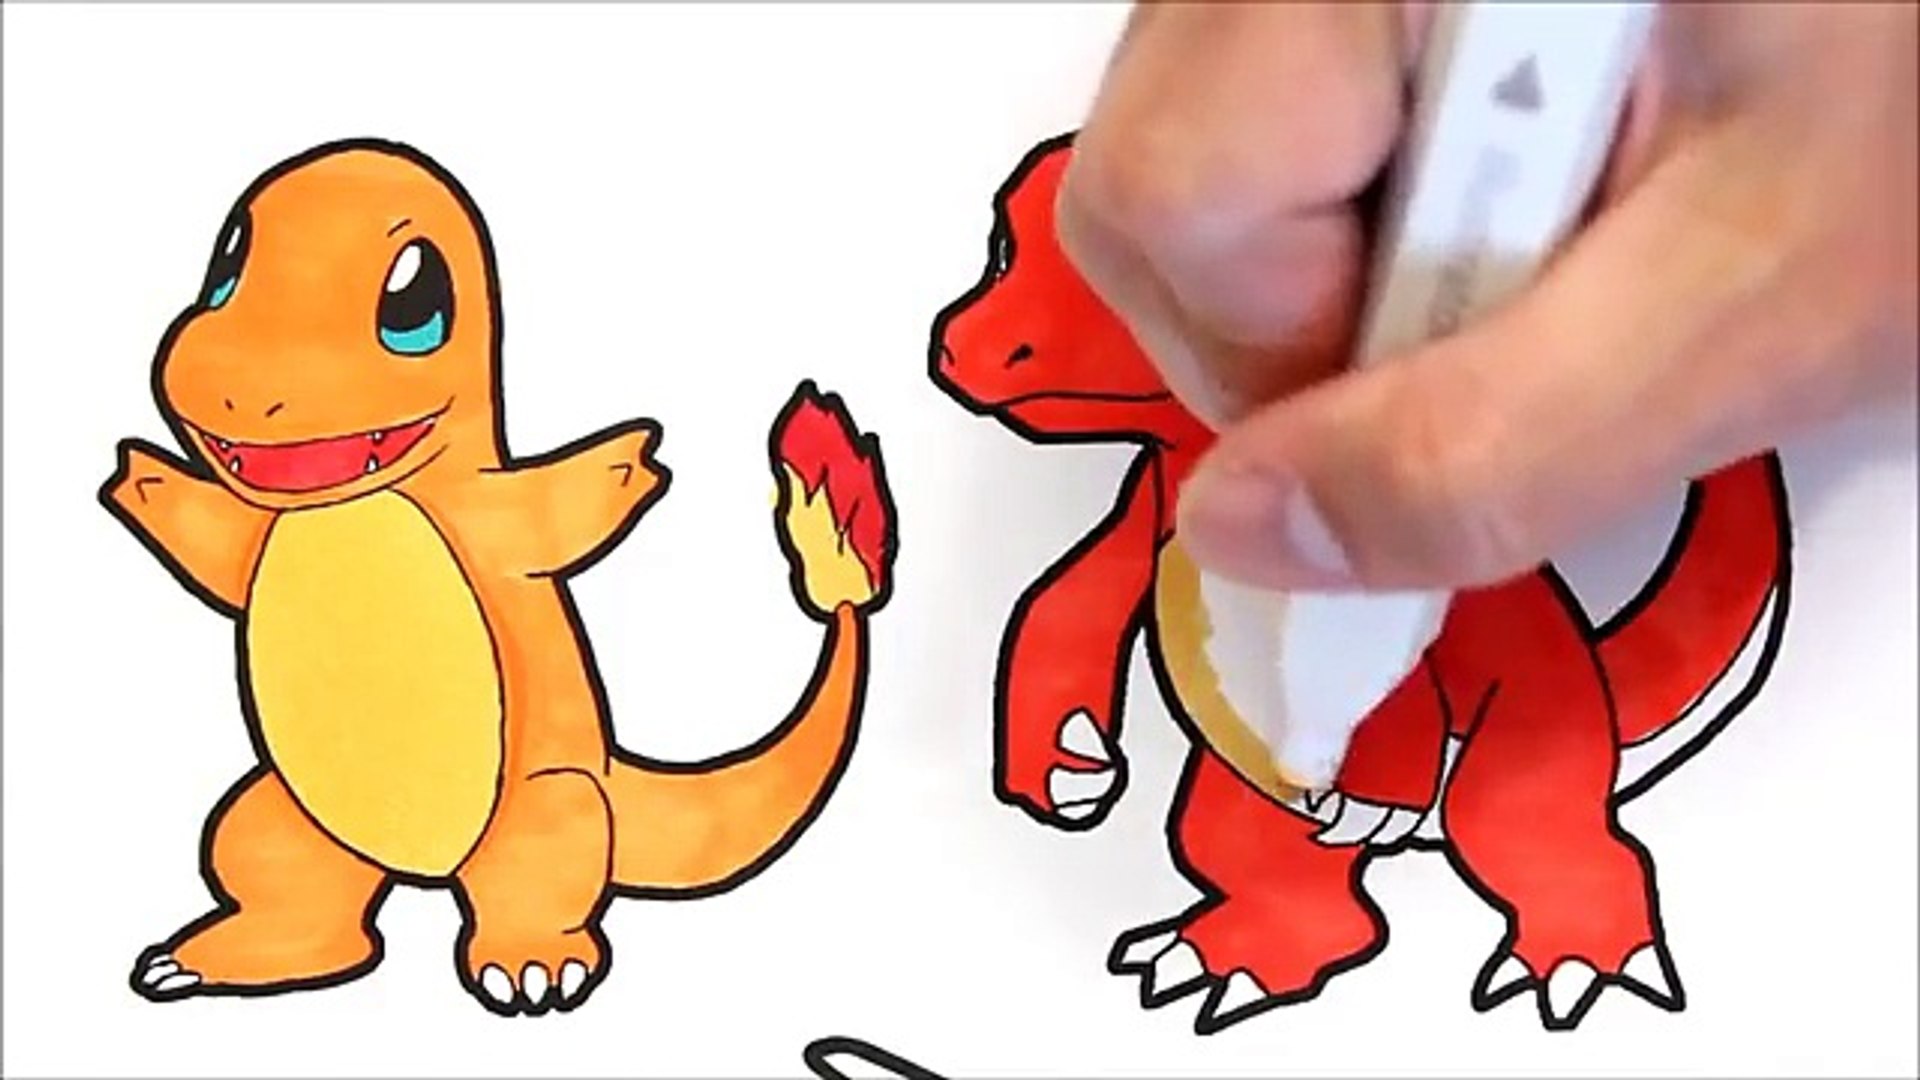 Pokemon Coloring Book Pages For Kids Speed Coloring Charmander Charmeleon Charizard Video Dailymotion Kids also like another pokemon's such as charizard, sylveon and. pokemon coloring book pages for kids speed coloring charmander charmeleon charizard